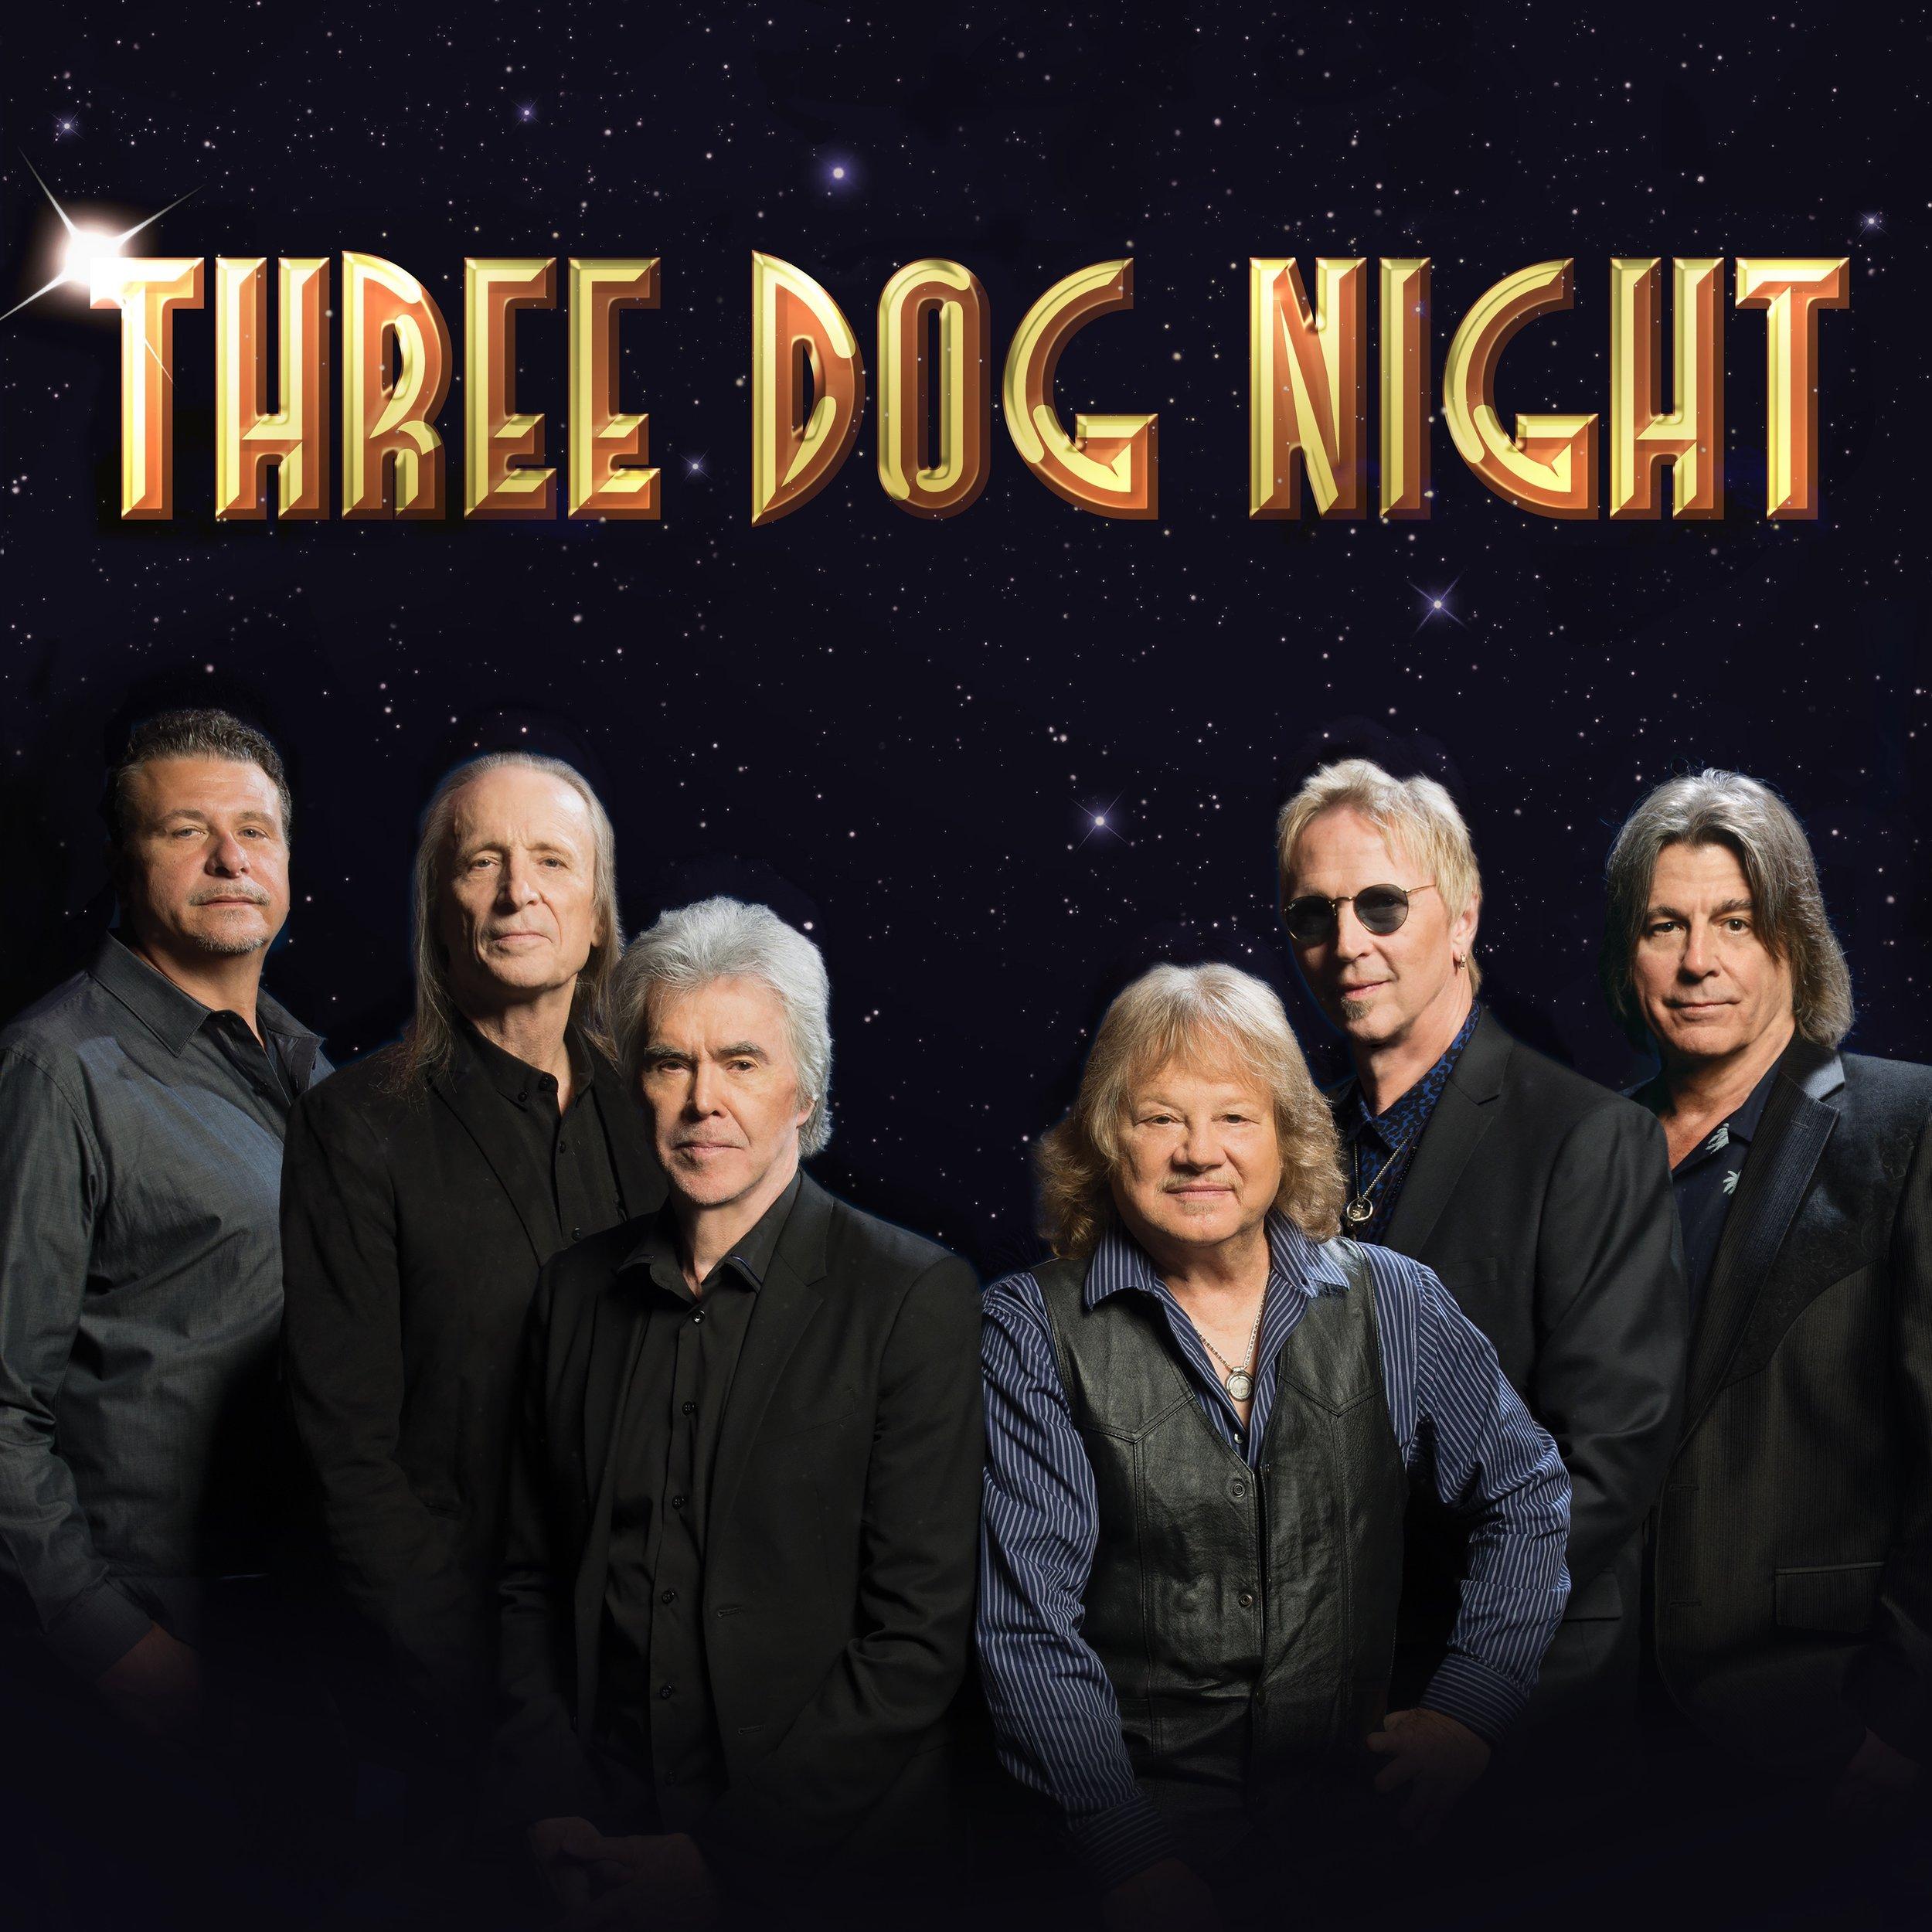 Three Dog Night announce June 23 show at the Fox | The Spokesman-Review